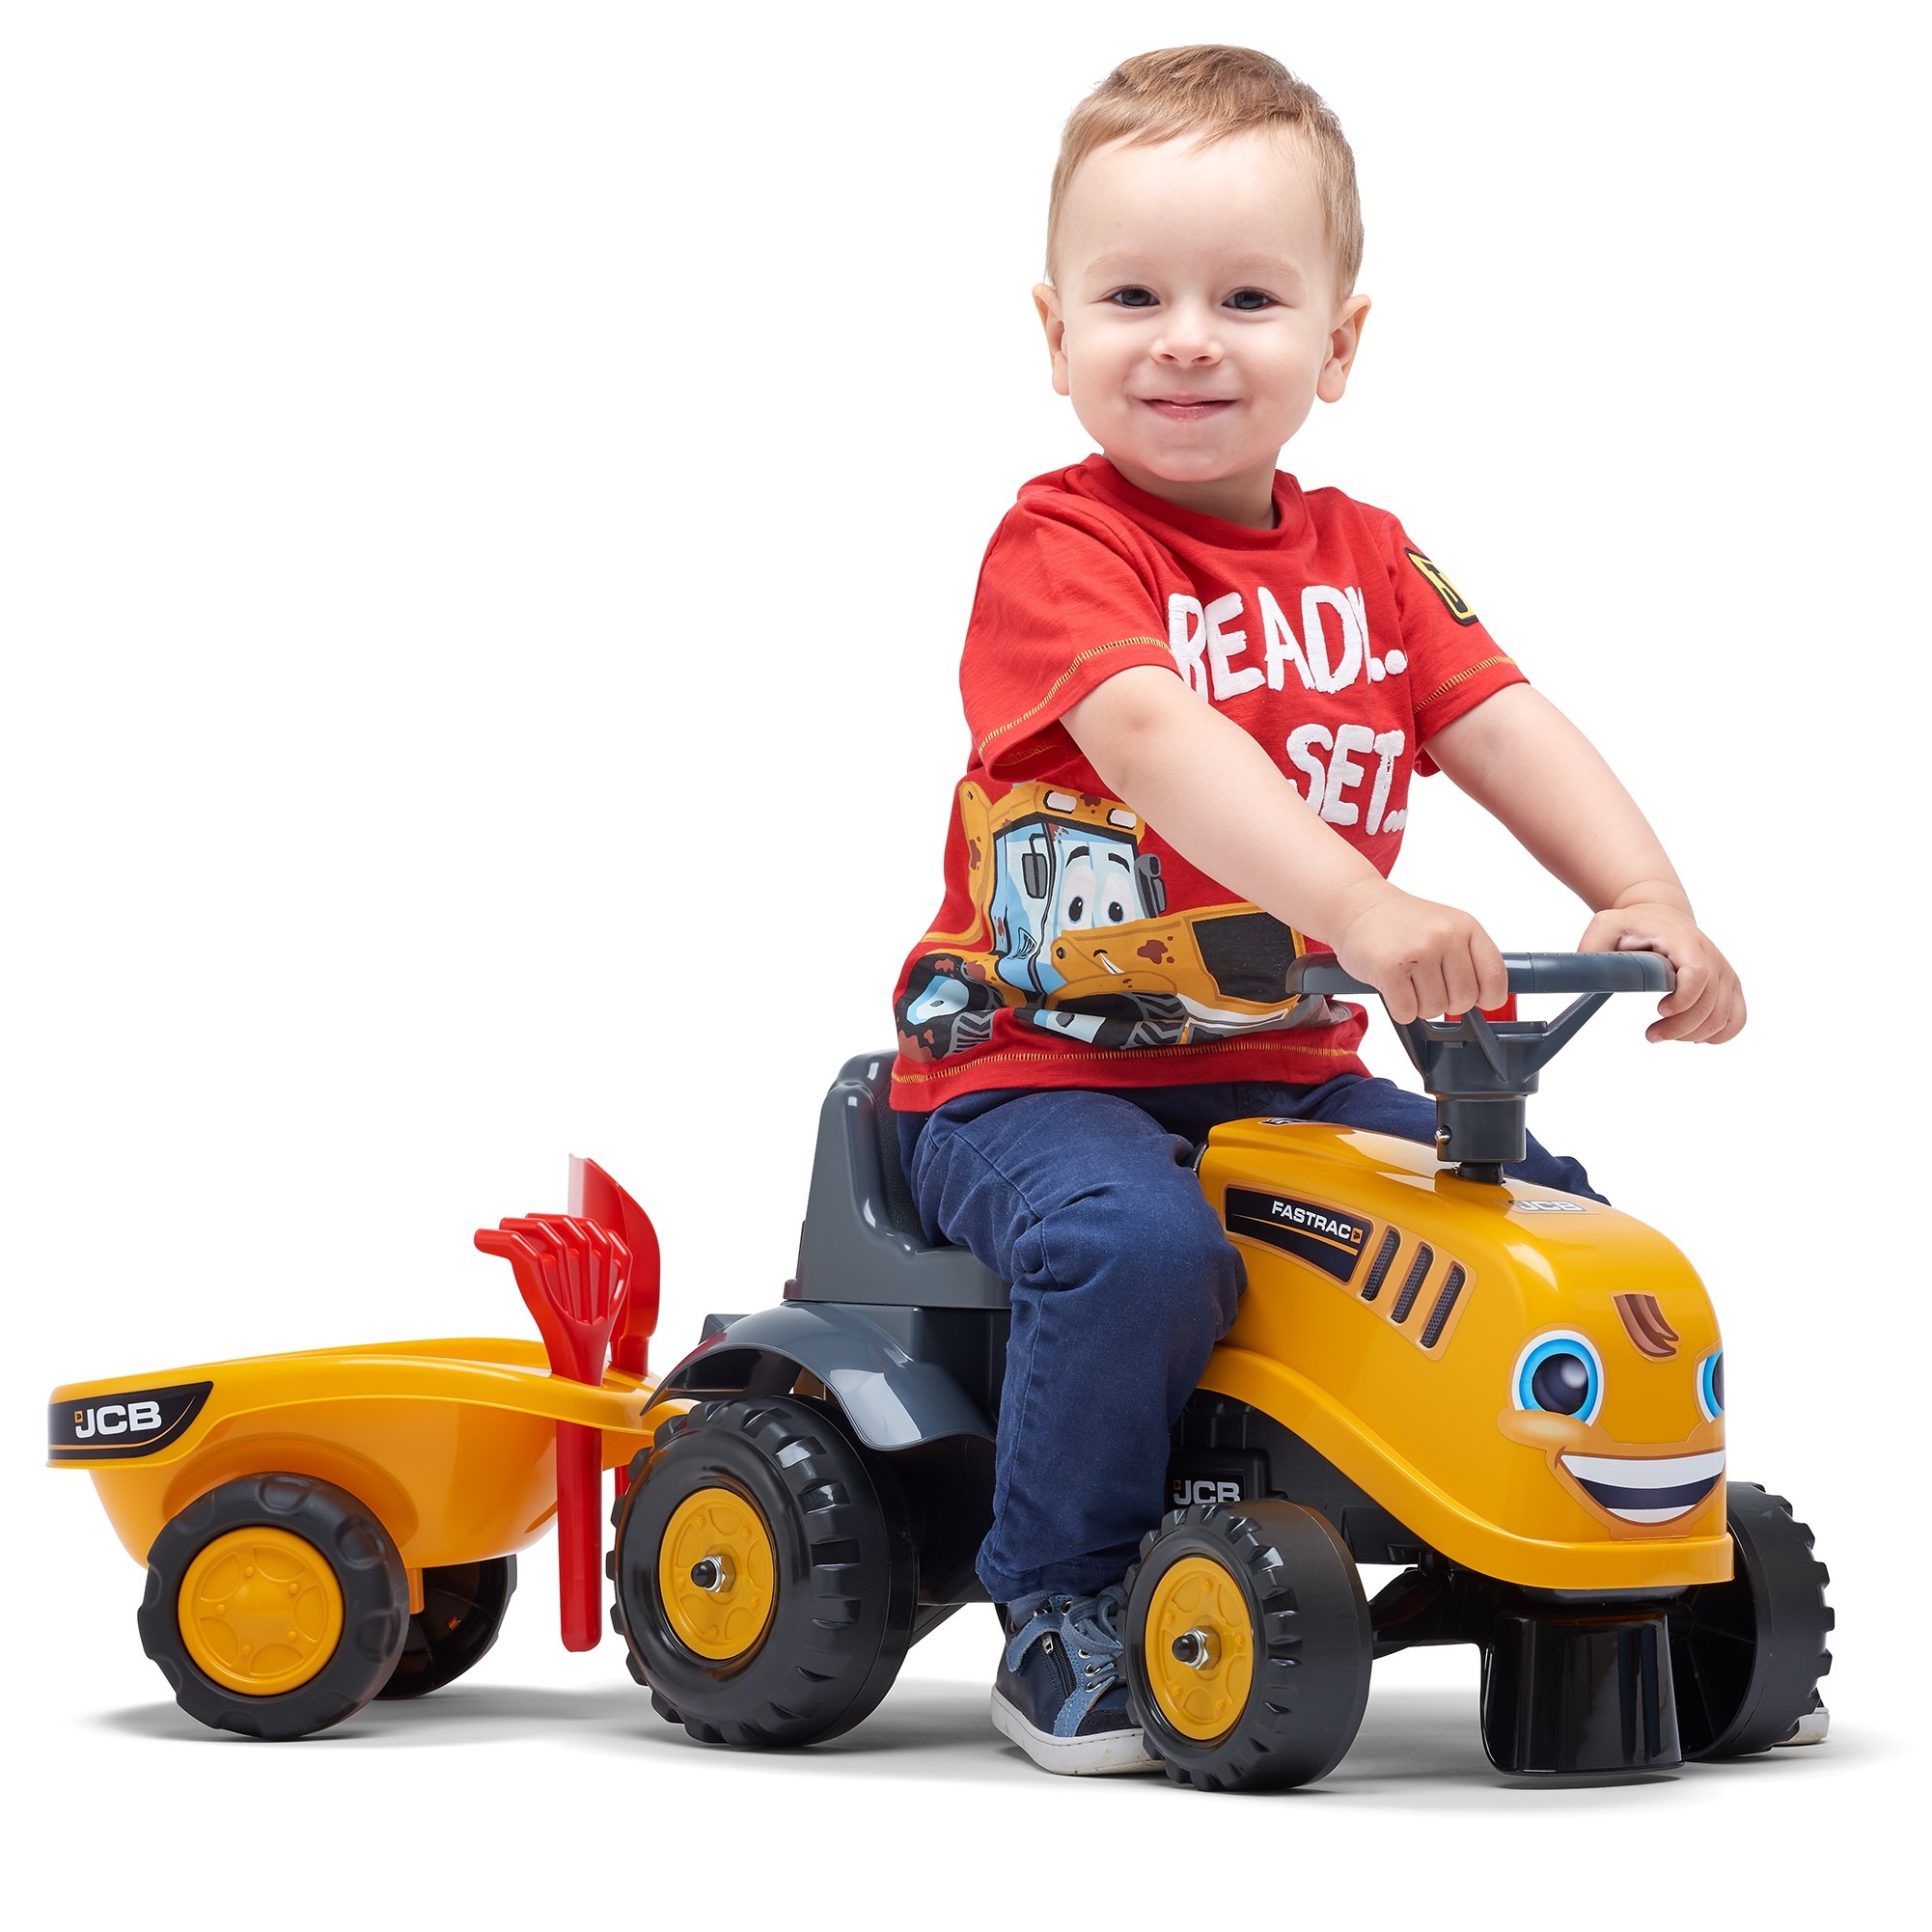 Baby JCB Ride-On Tractor